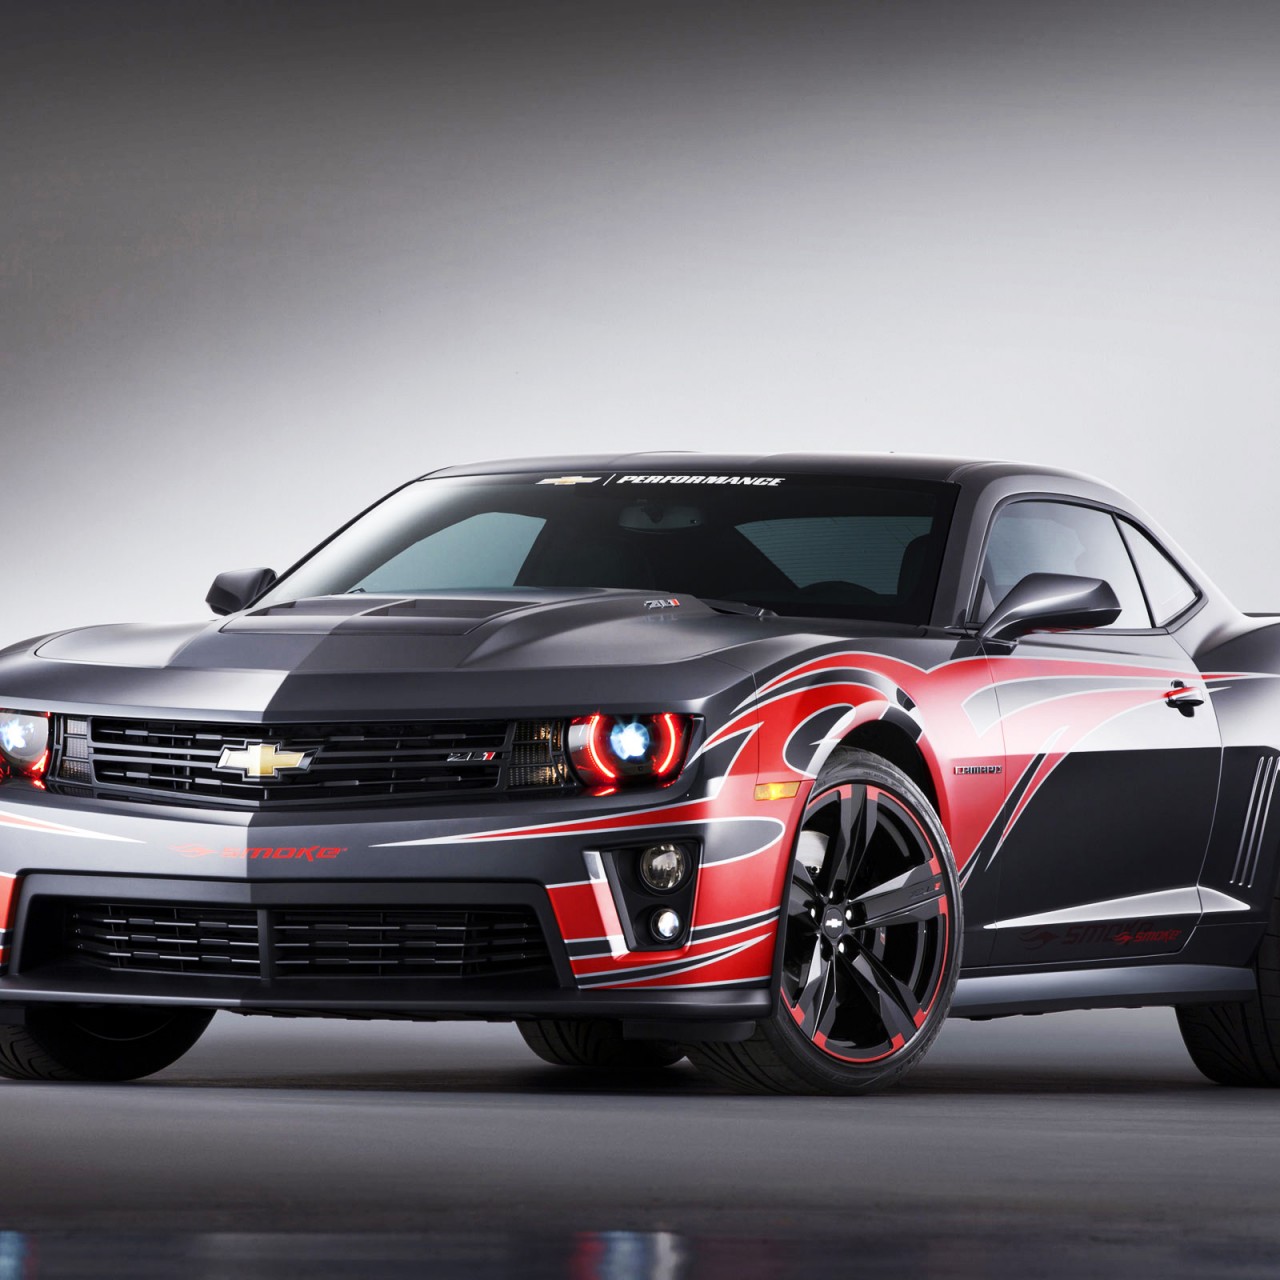 Chevy Muscle Car Wallpaper 6472 Hd Wallpapers in Cars   Imagescicom 1280x1280